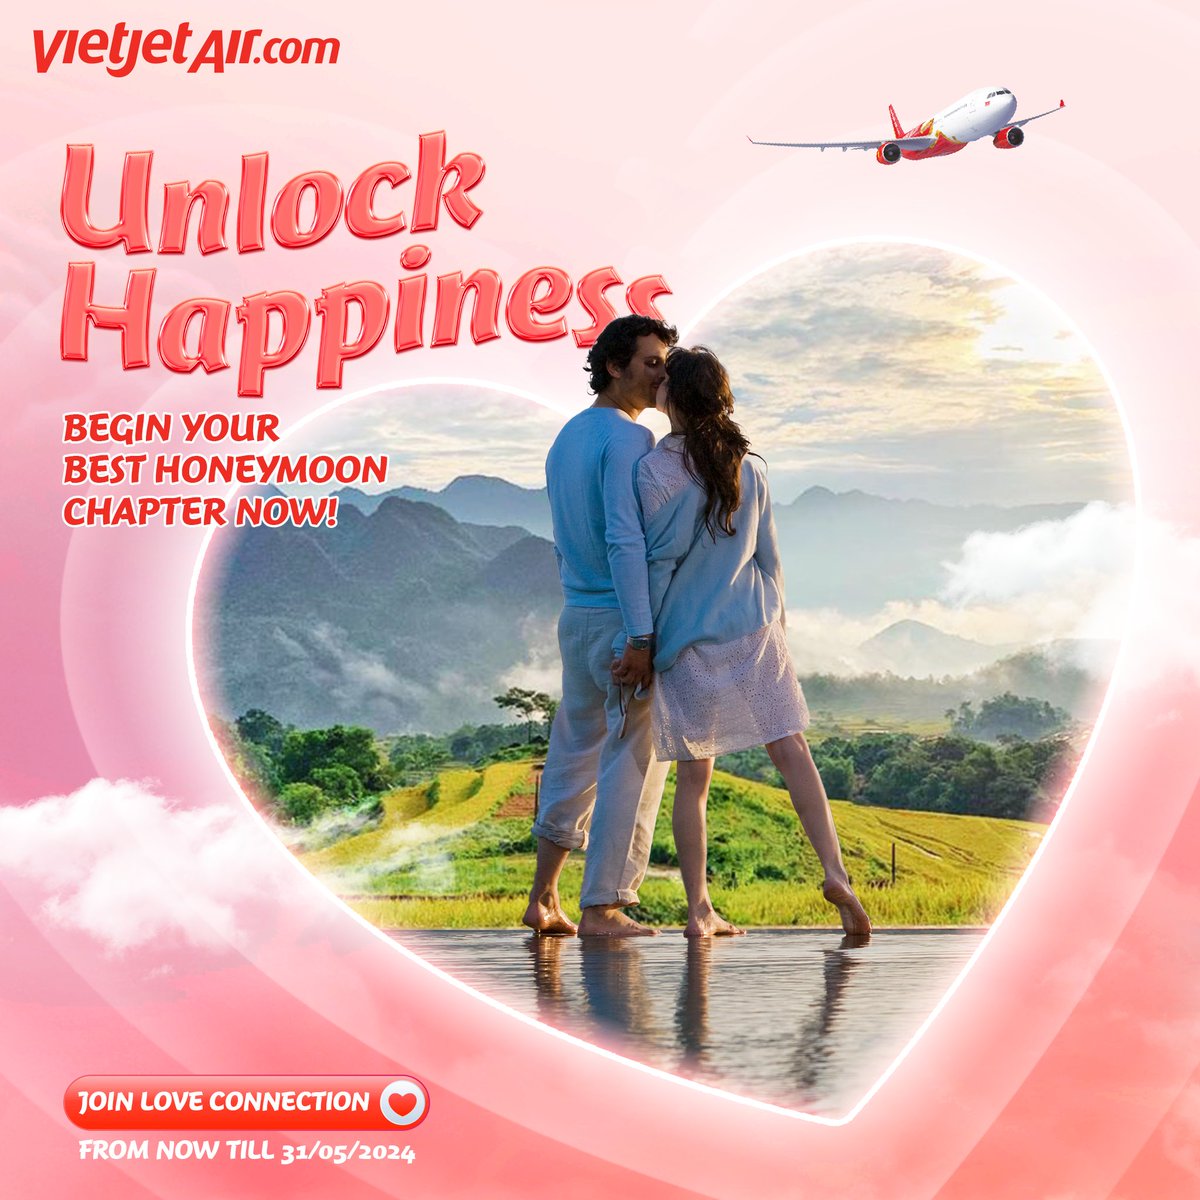 Begin dream honeymoon journey now! 💑 🤟 Enter the Love Connection contest to win a trip to Vietnam for two. 💖Depen your connection, create lasting memories & set the stage for your married life. 👉 Join now: loveconnection.vietjetair.com ⏰ Now - 31/05/2024 (*) T&C apply #Vietjet